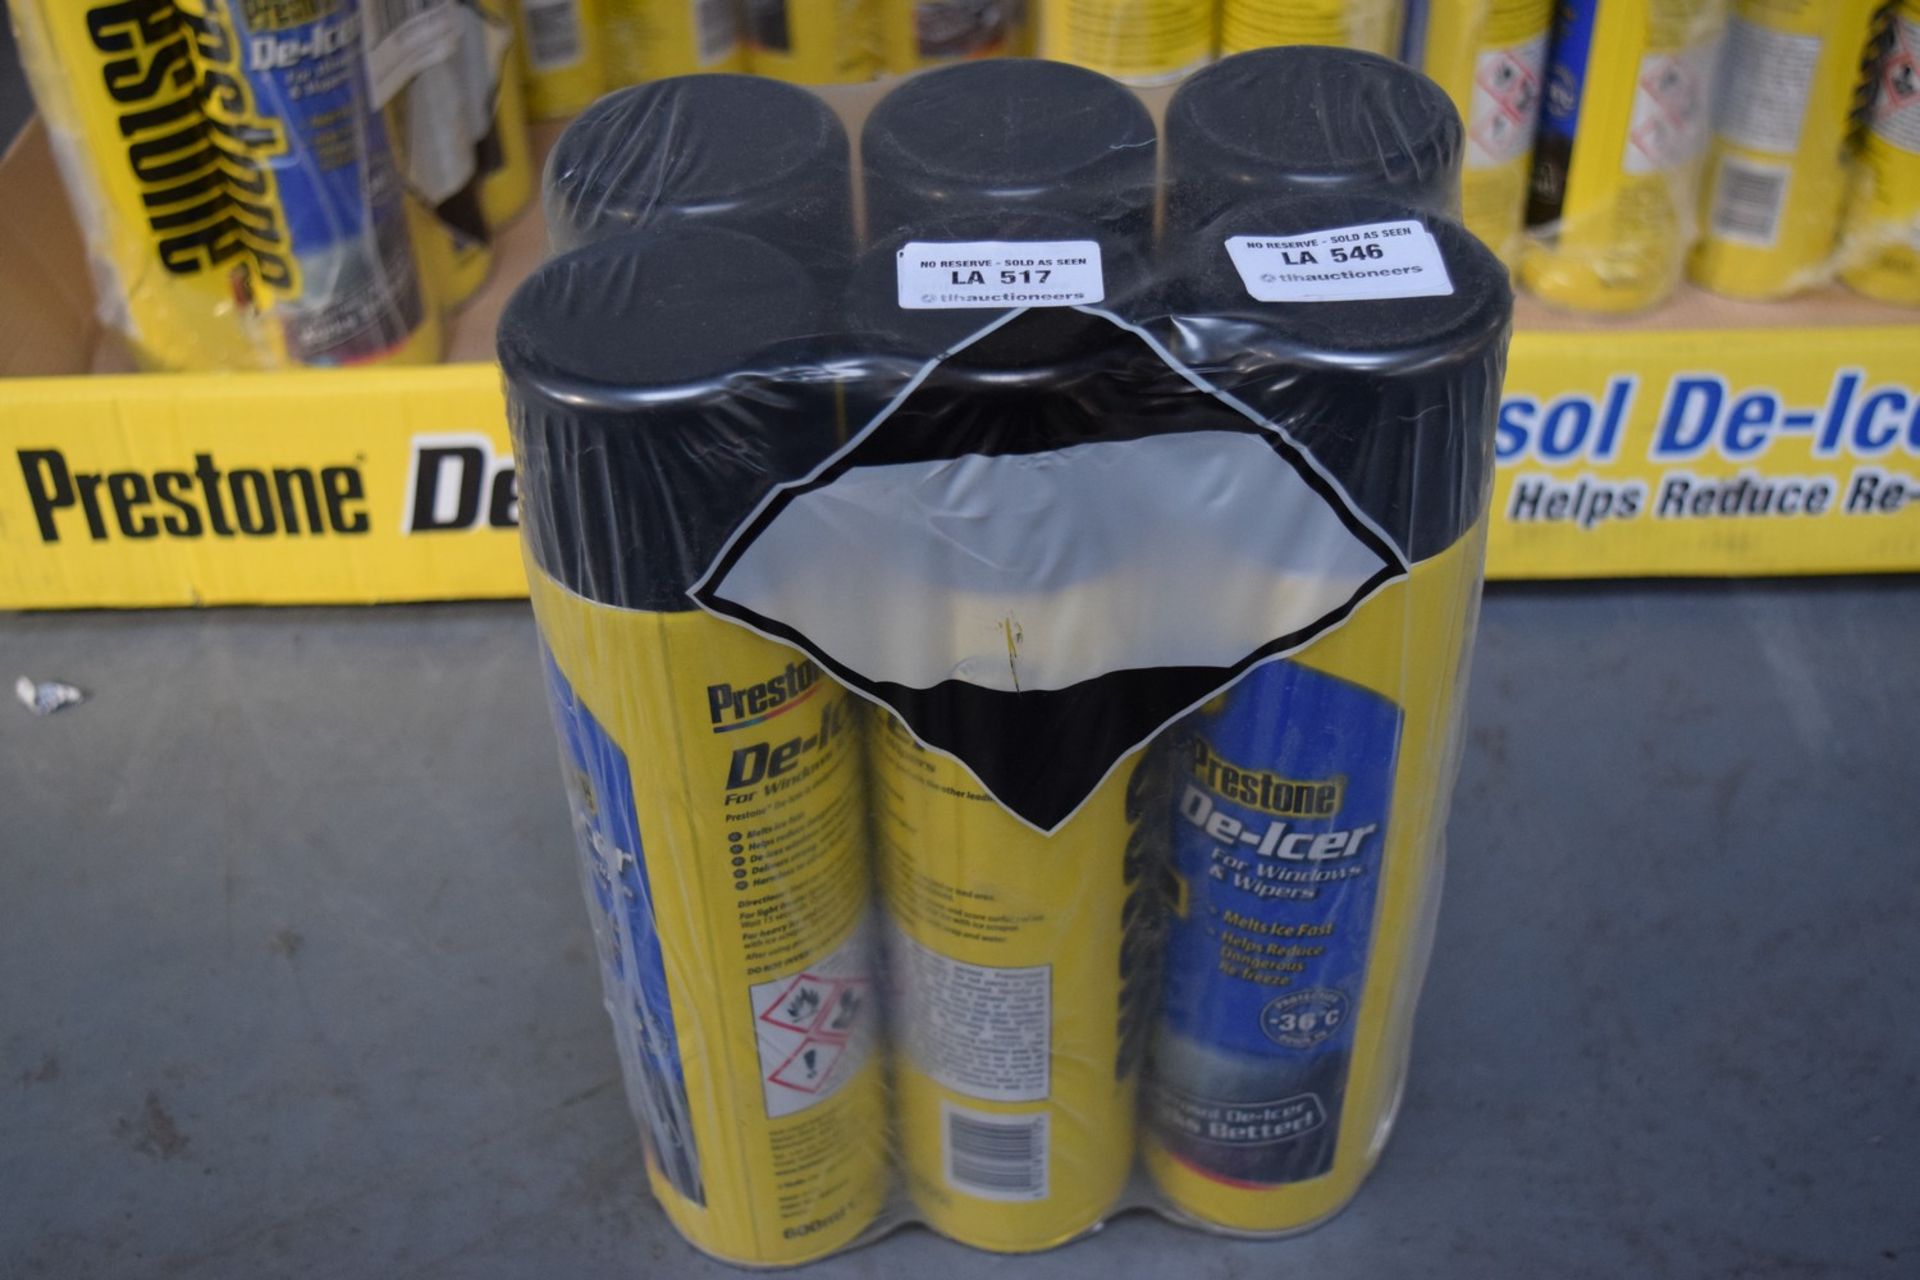 6 X 600ML CAN OF PRESTON DE-ICER FOR WINDOWS AND WIPERS RRP £3.50 EACH 26.04.16